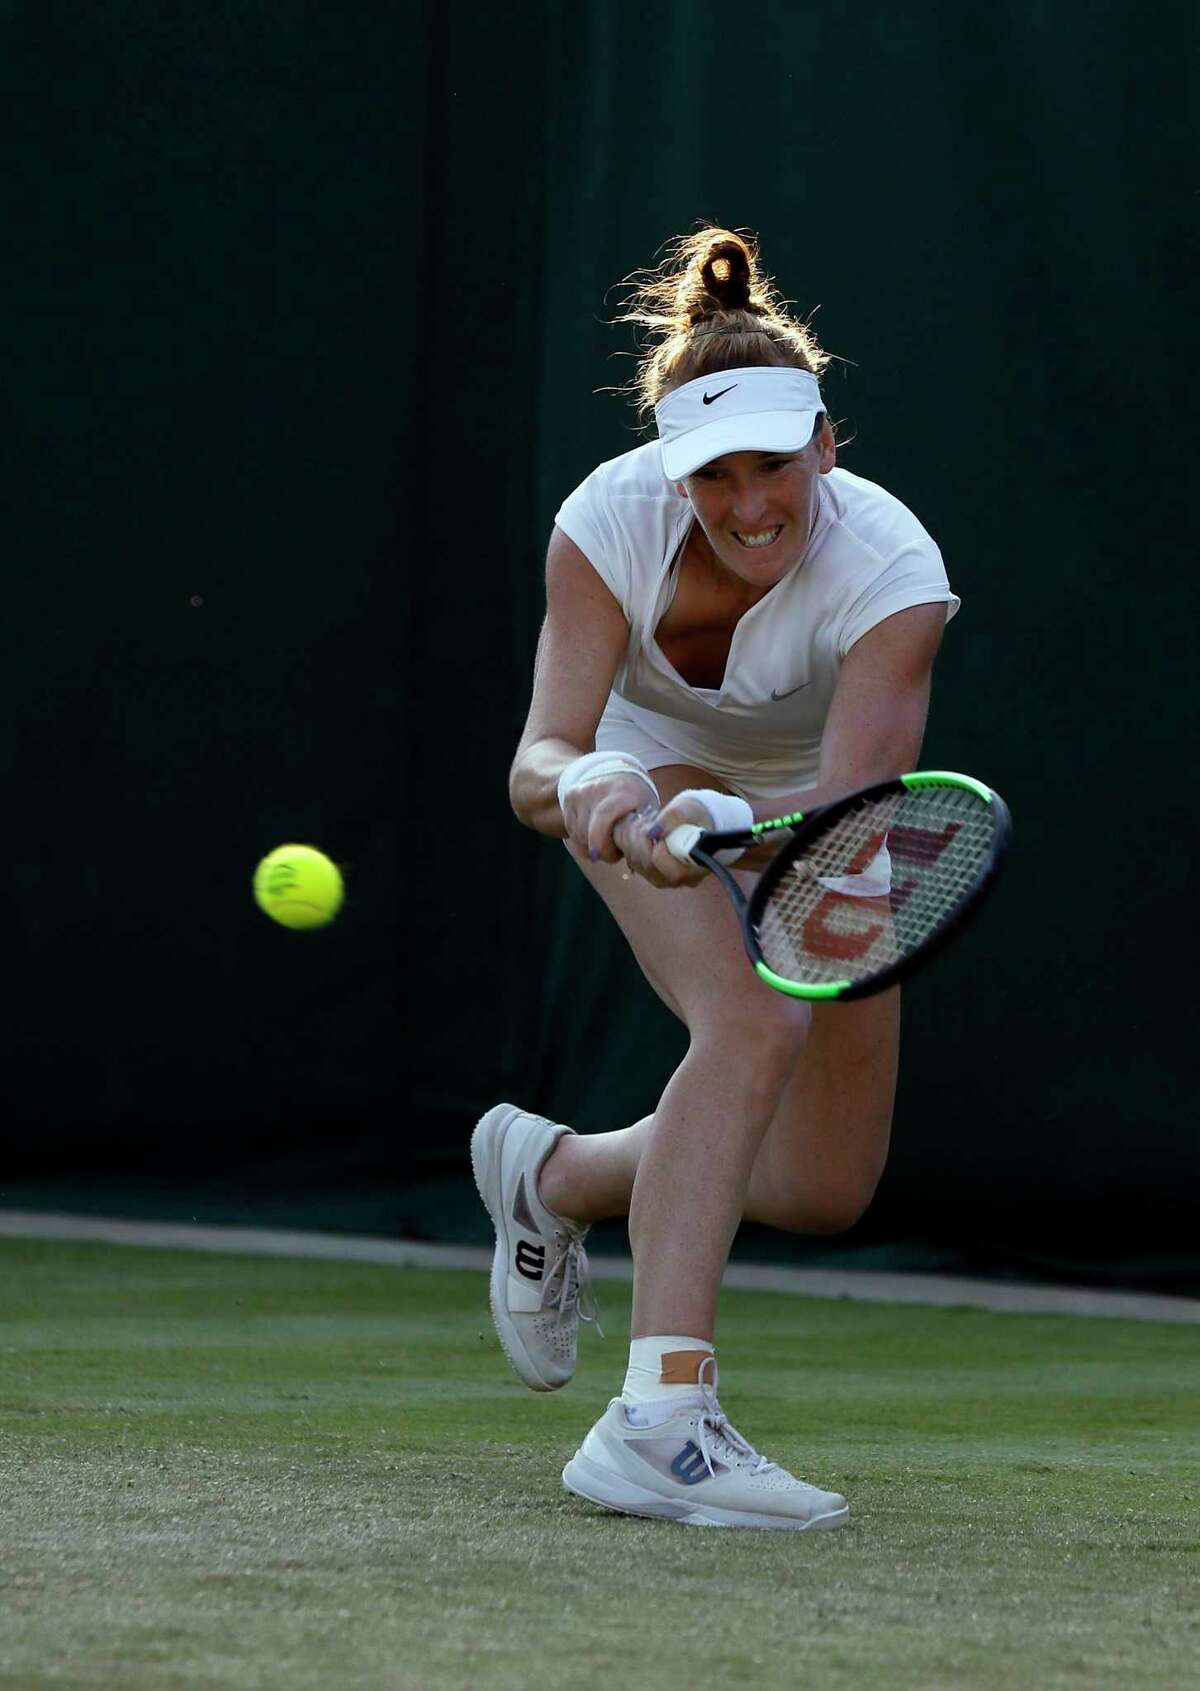 Madison Brengle of the United States returns to Czech Republic's Petra Kvitova during their Women's Singles Match on day three at the Wimbledon Tennis Championships in London Wednesday, July 5, 2017. (AP Photo/Kirsty Wigglesworth)